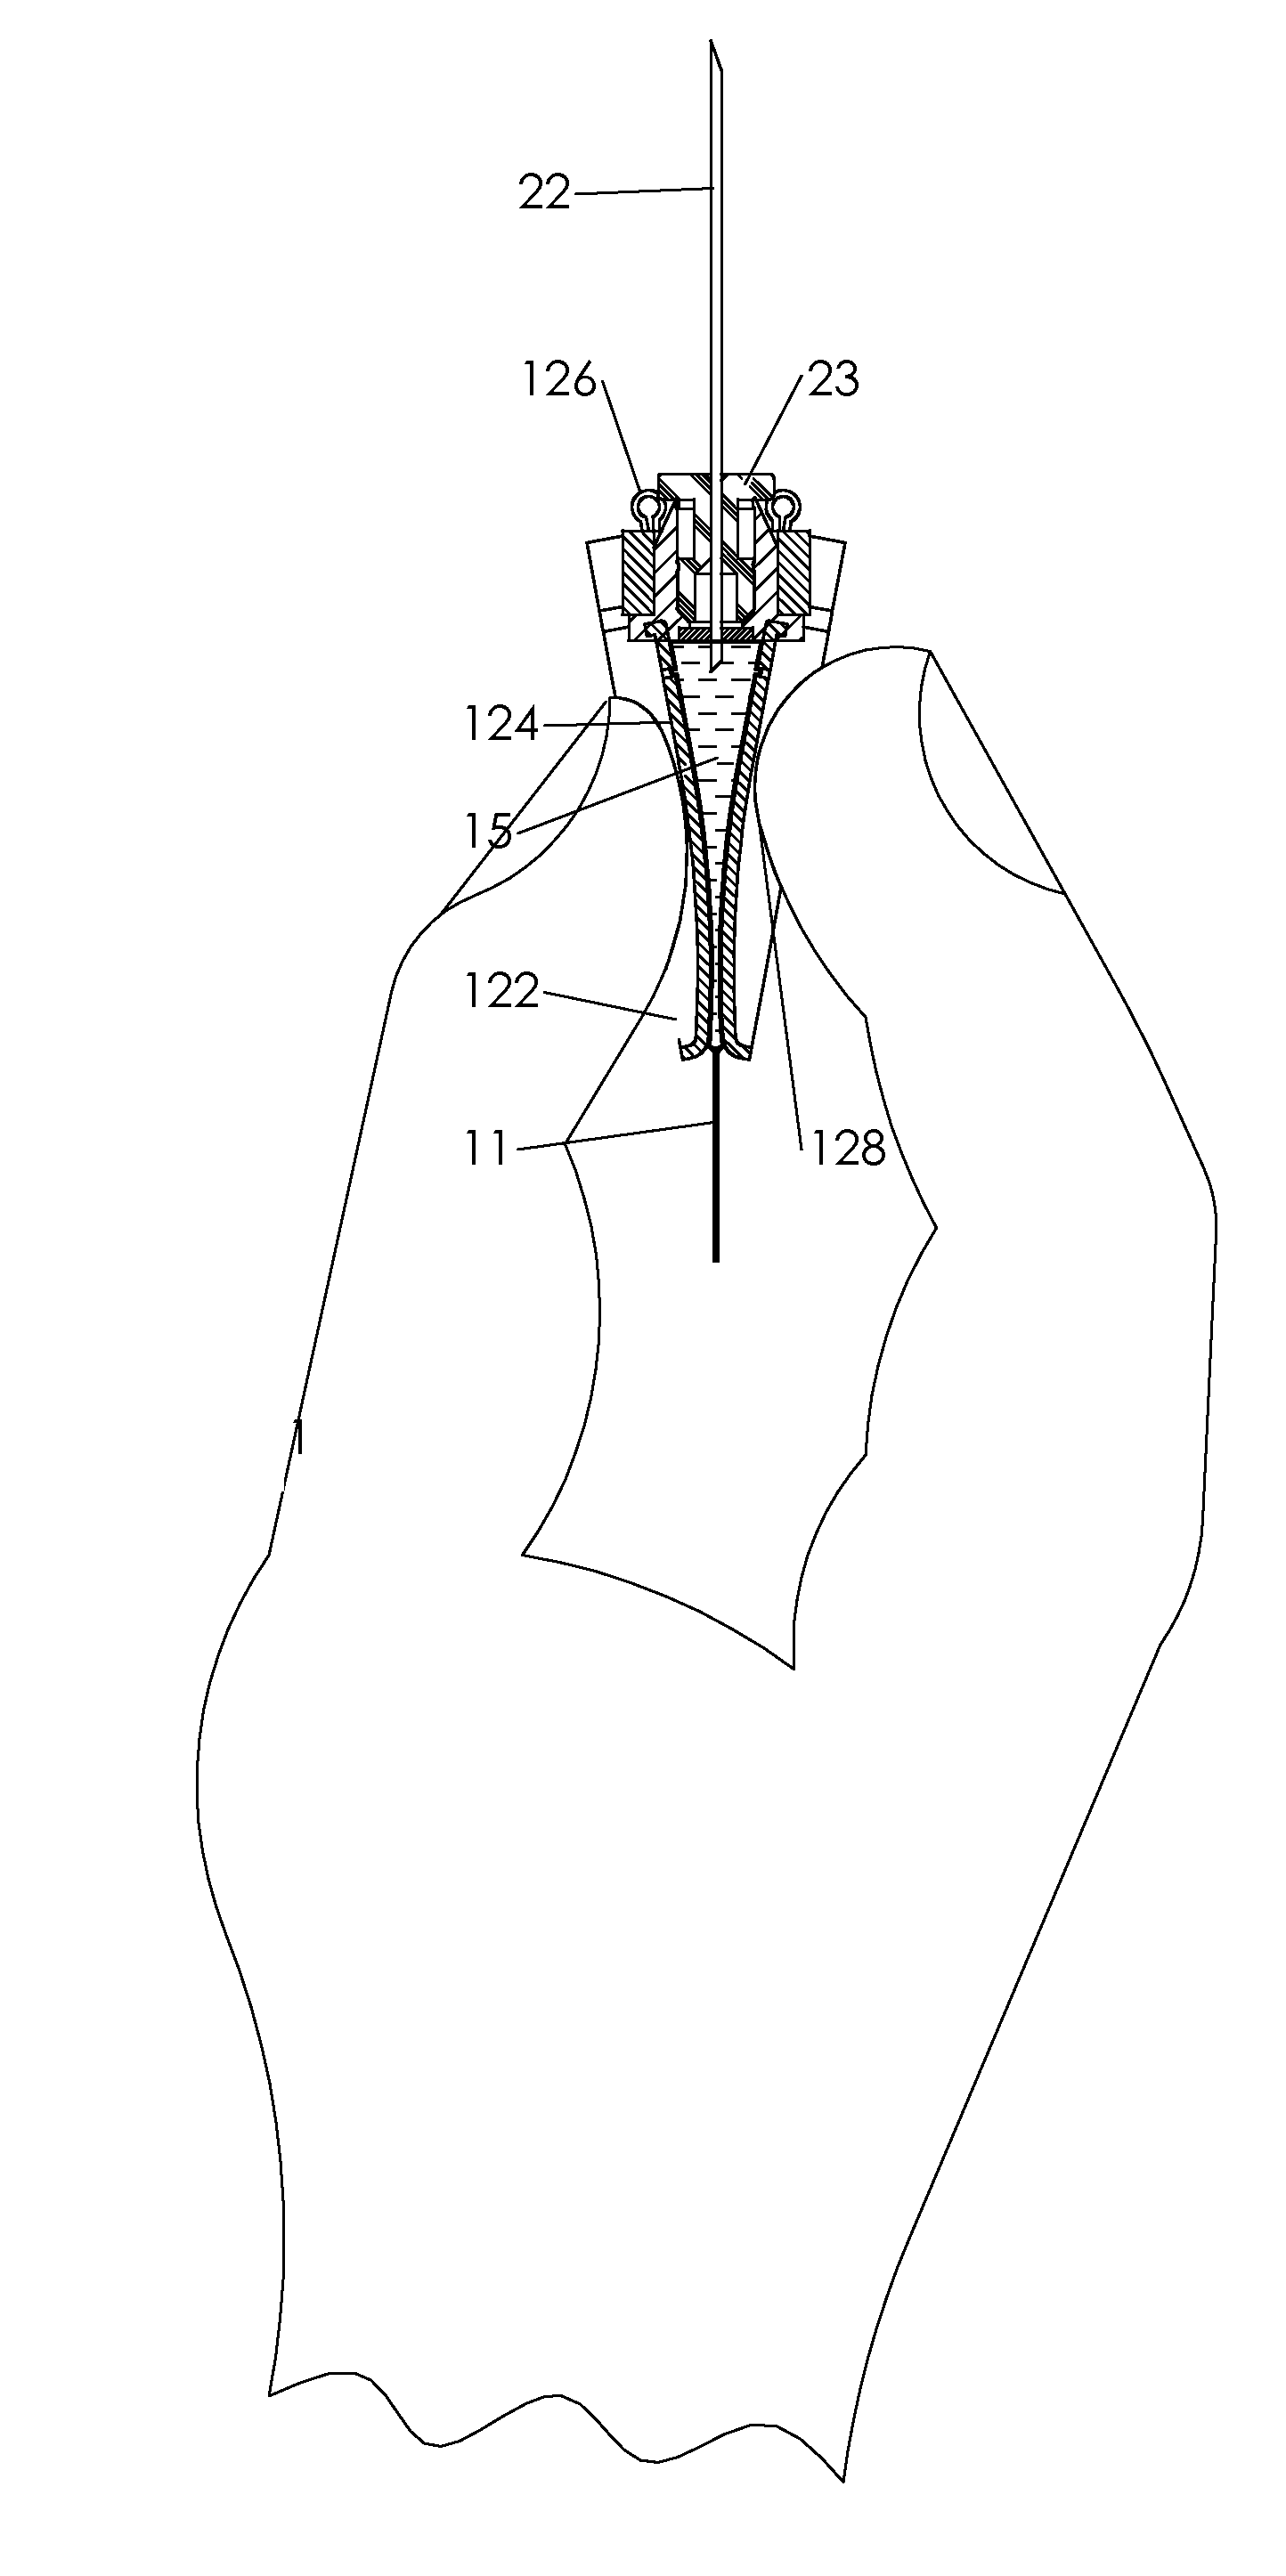 Dispenser and therapeutic package suitable for administering a therapeutic substance to a subject, along with method relating to same